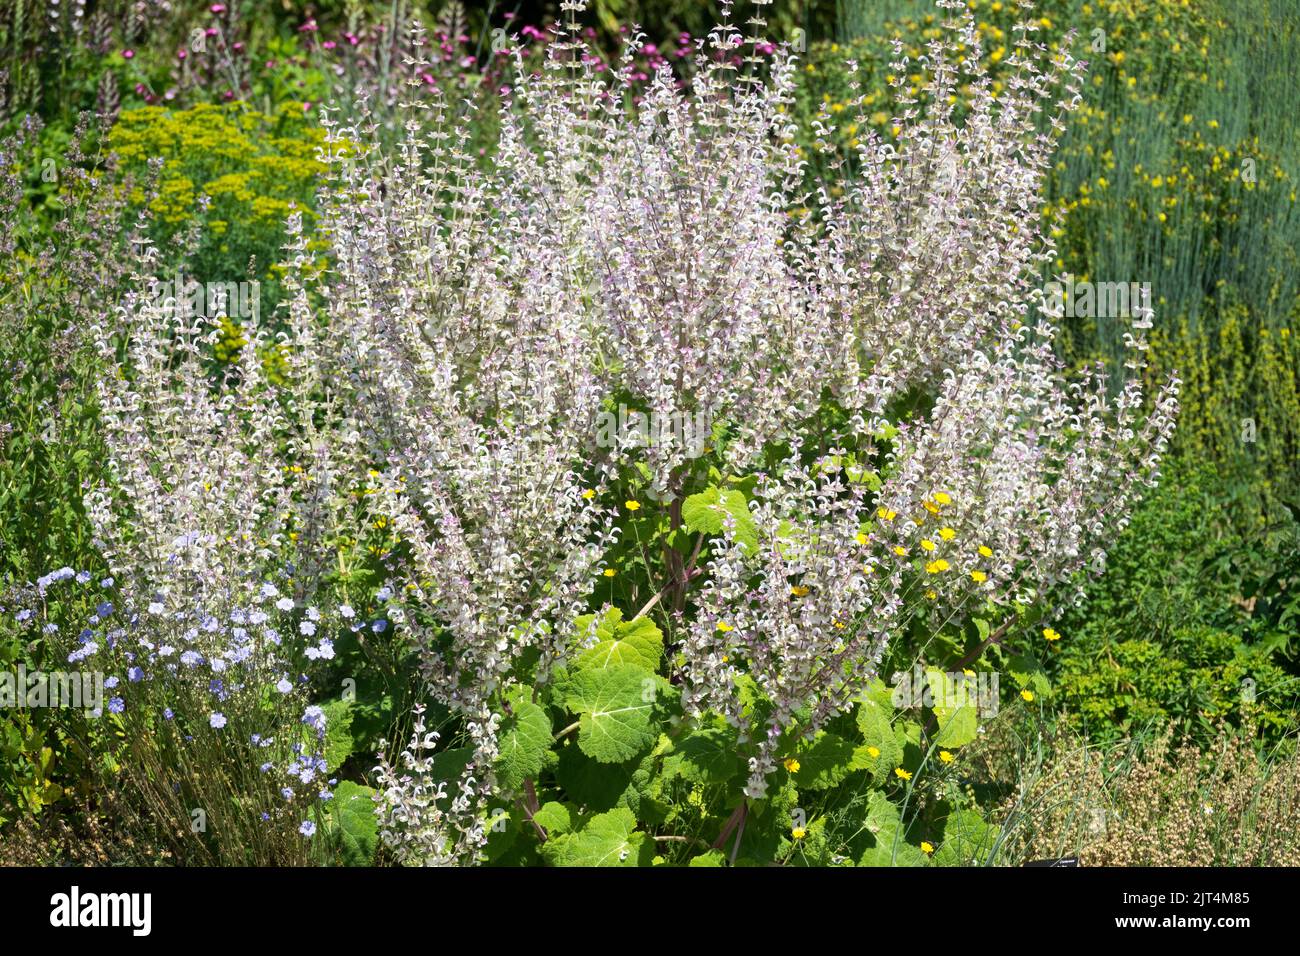 Salvia sclarea Plant Flowering in Garden Blooming Flowers, Herbaceous Salvias White Flower Hardy June perennial plants Sage Salvia season early summer Stock Photo